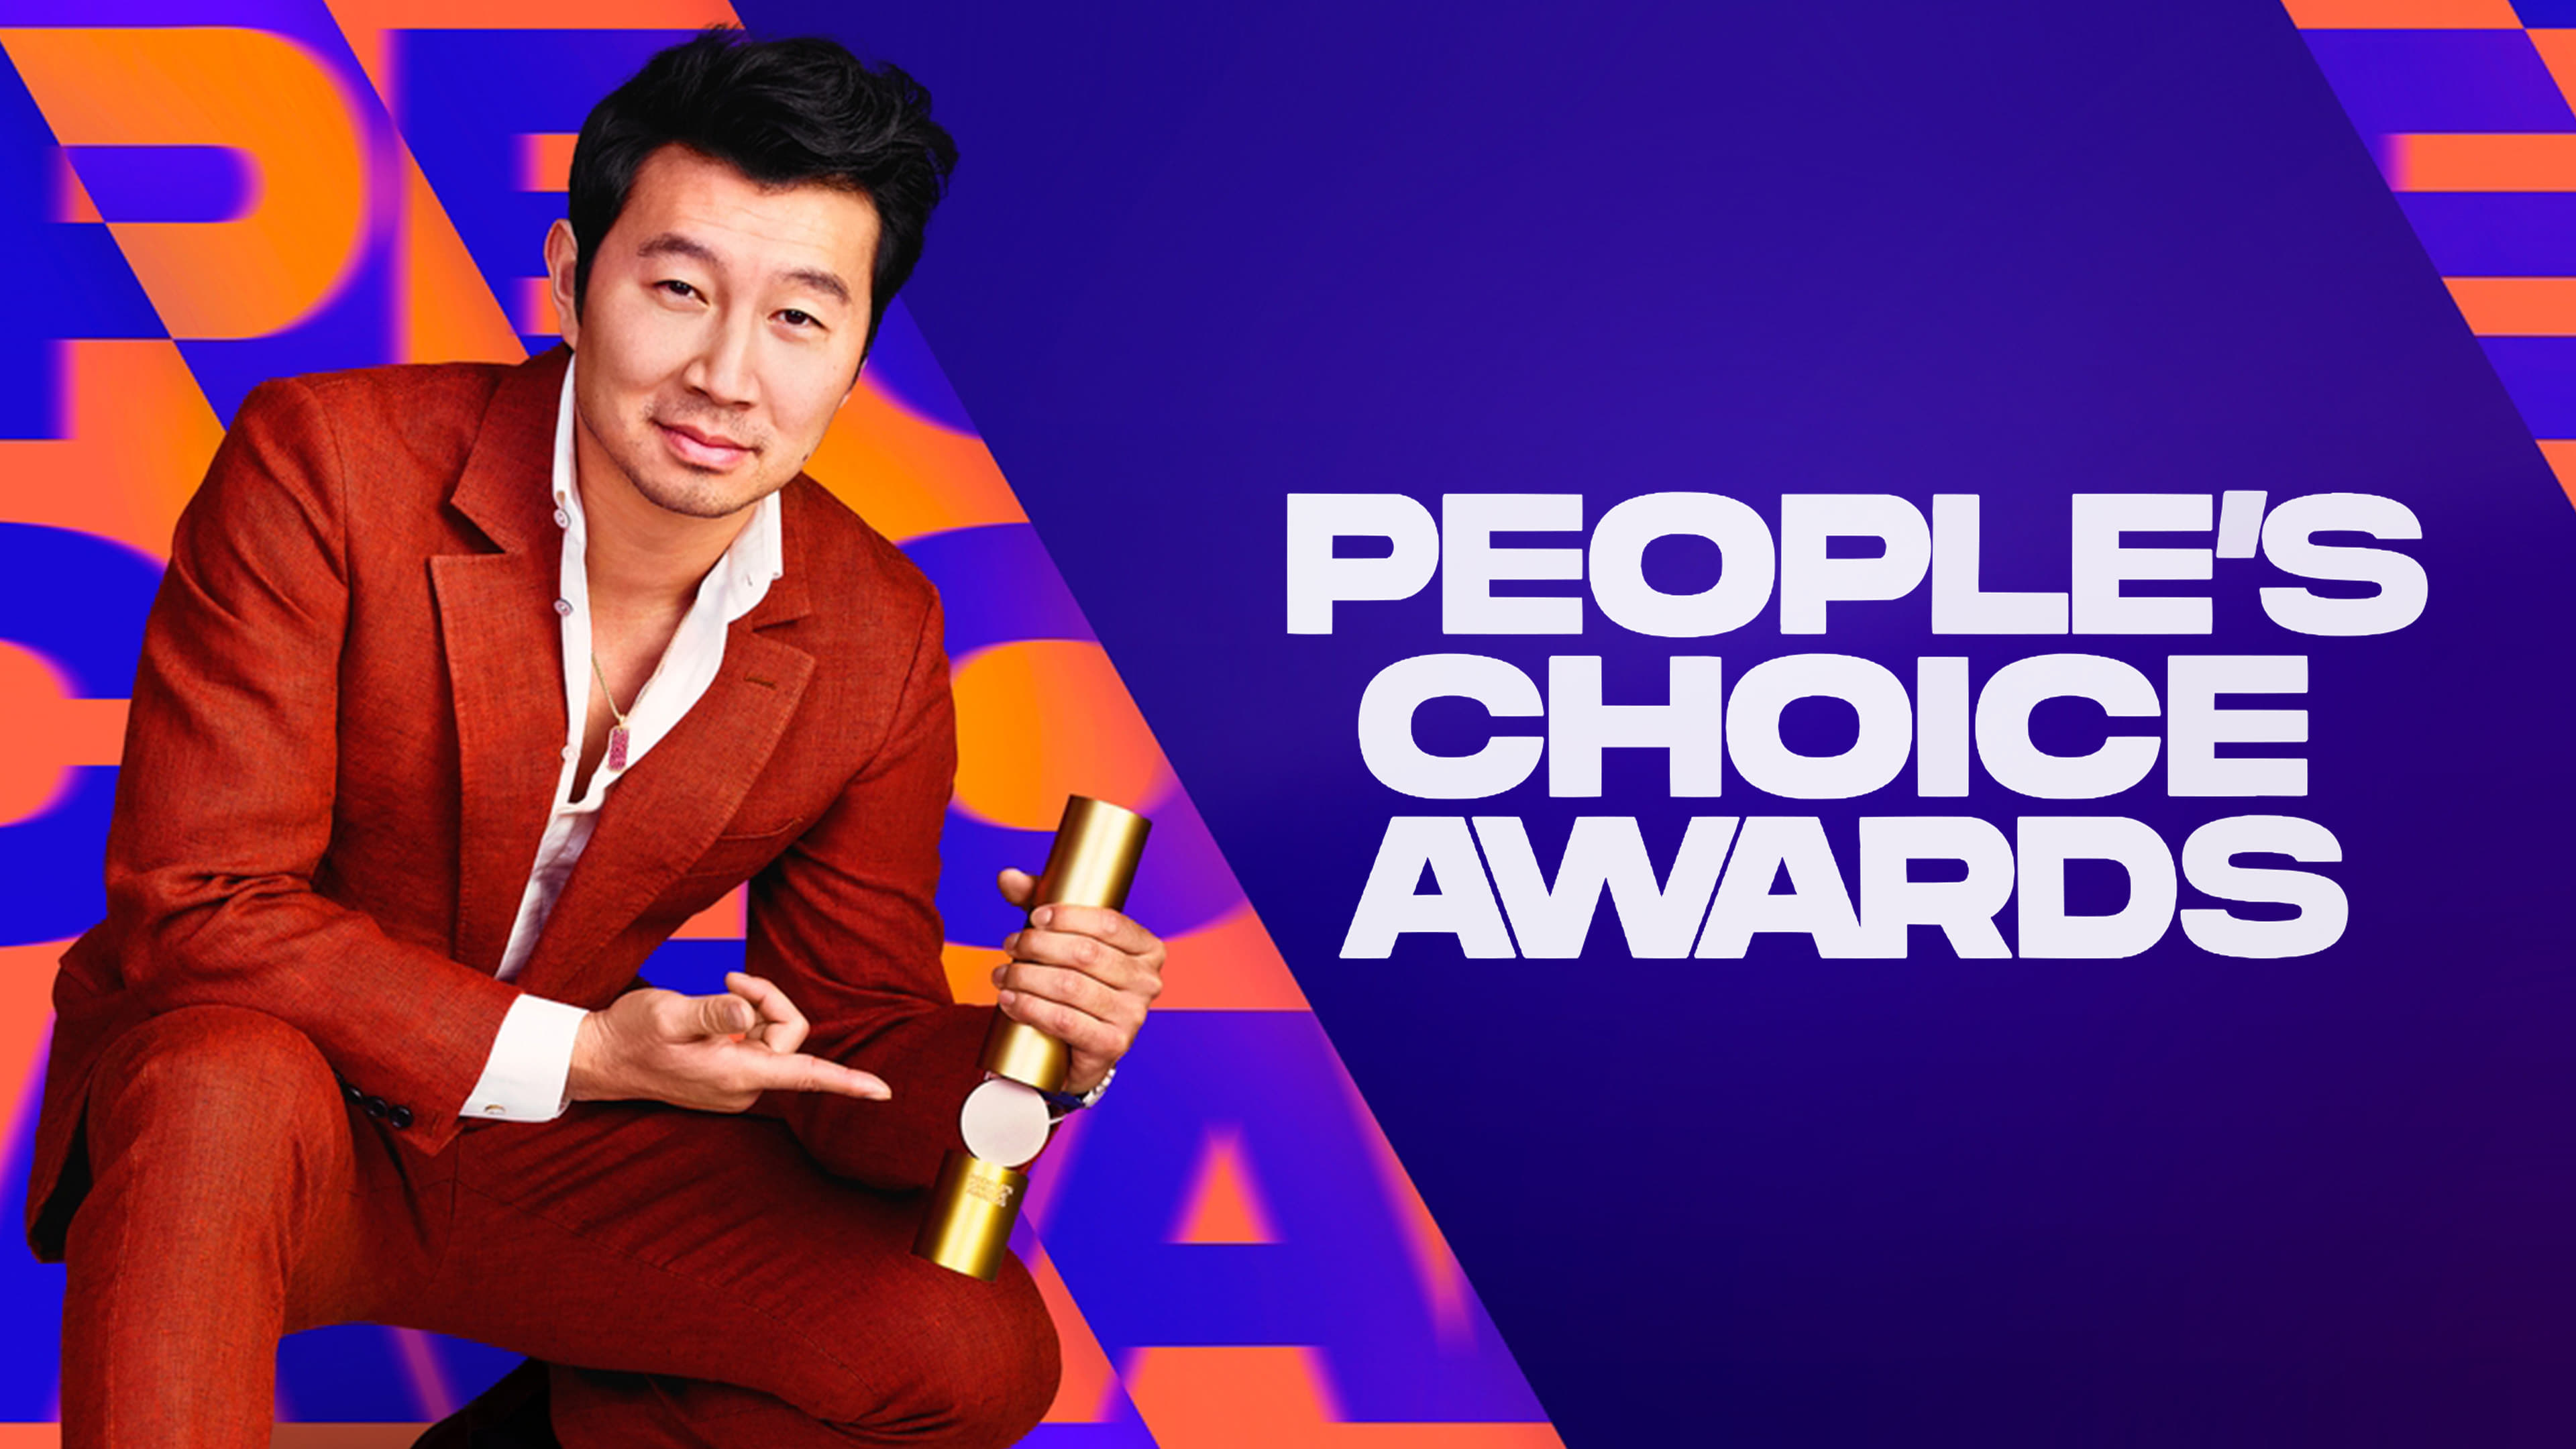 The 46th Annual People’s Choice Awards